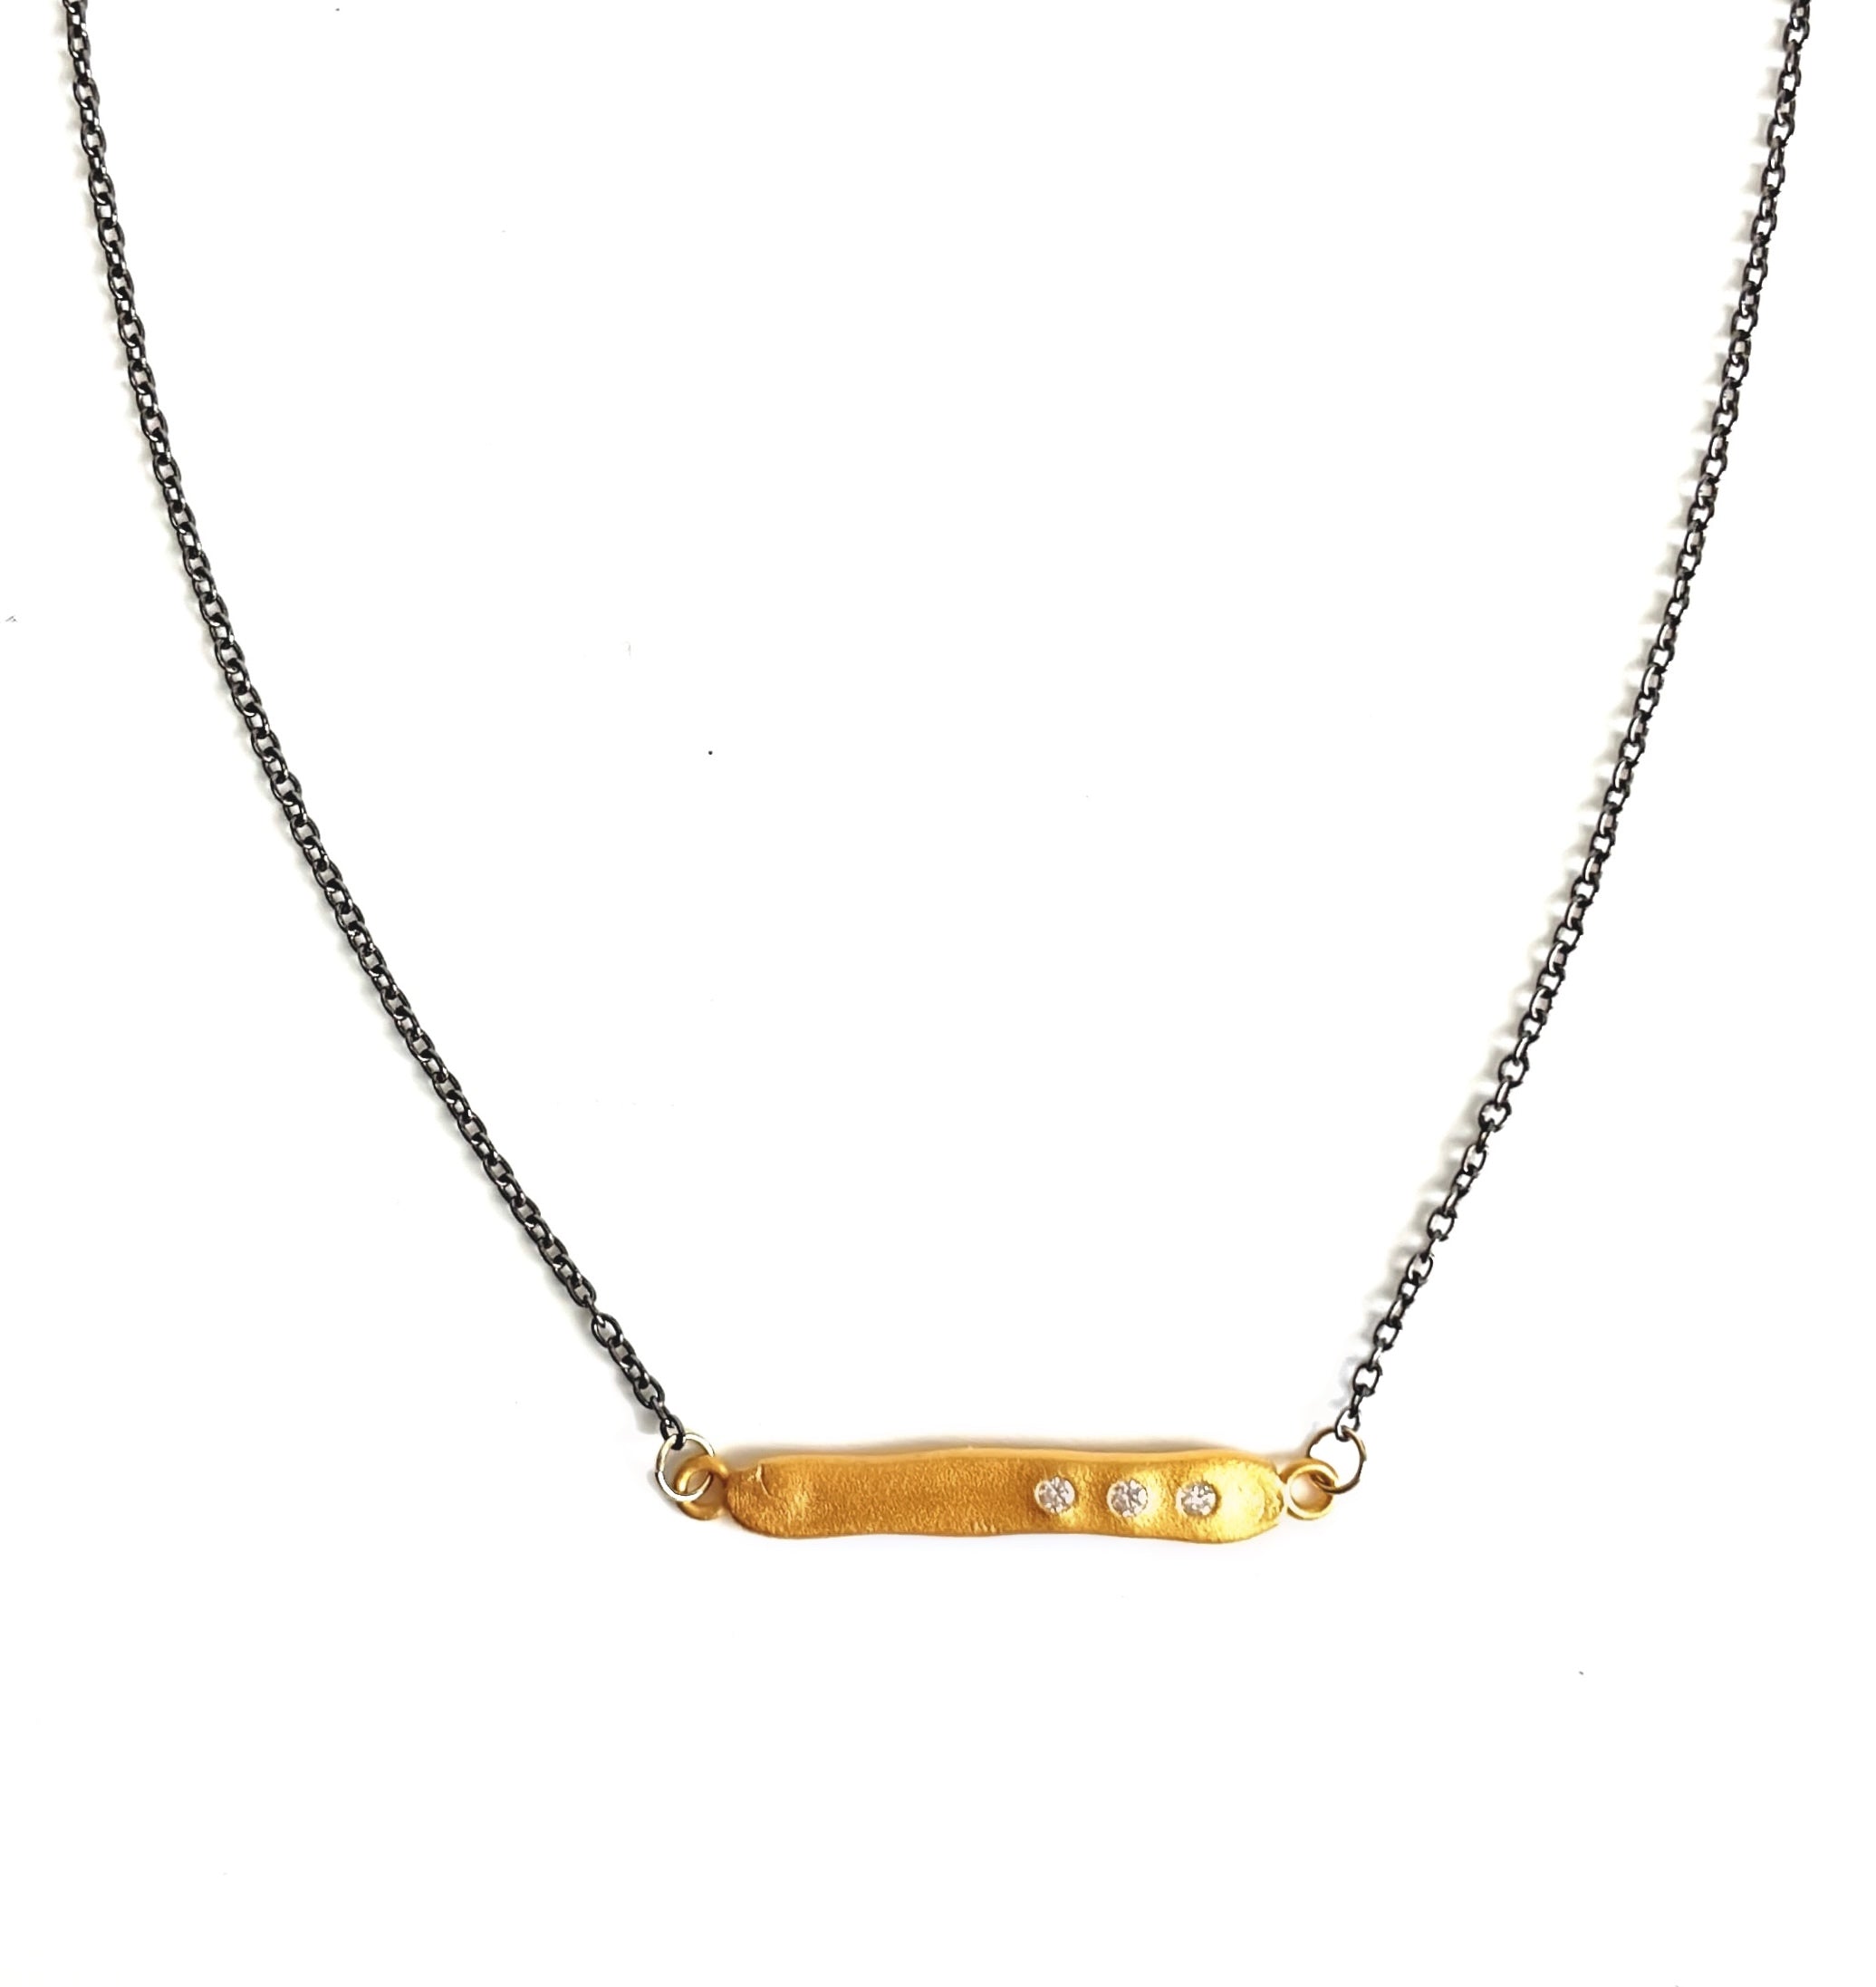 One of a Kind Bar Necklace Gold 20107